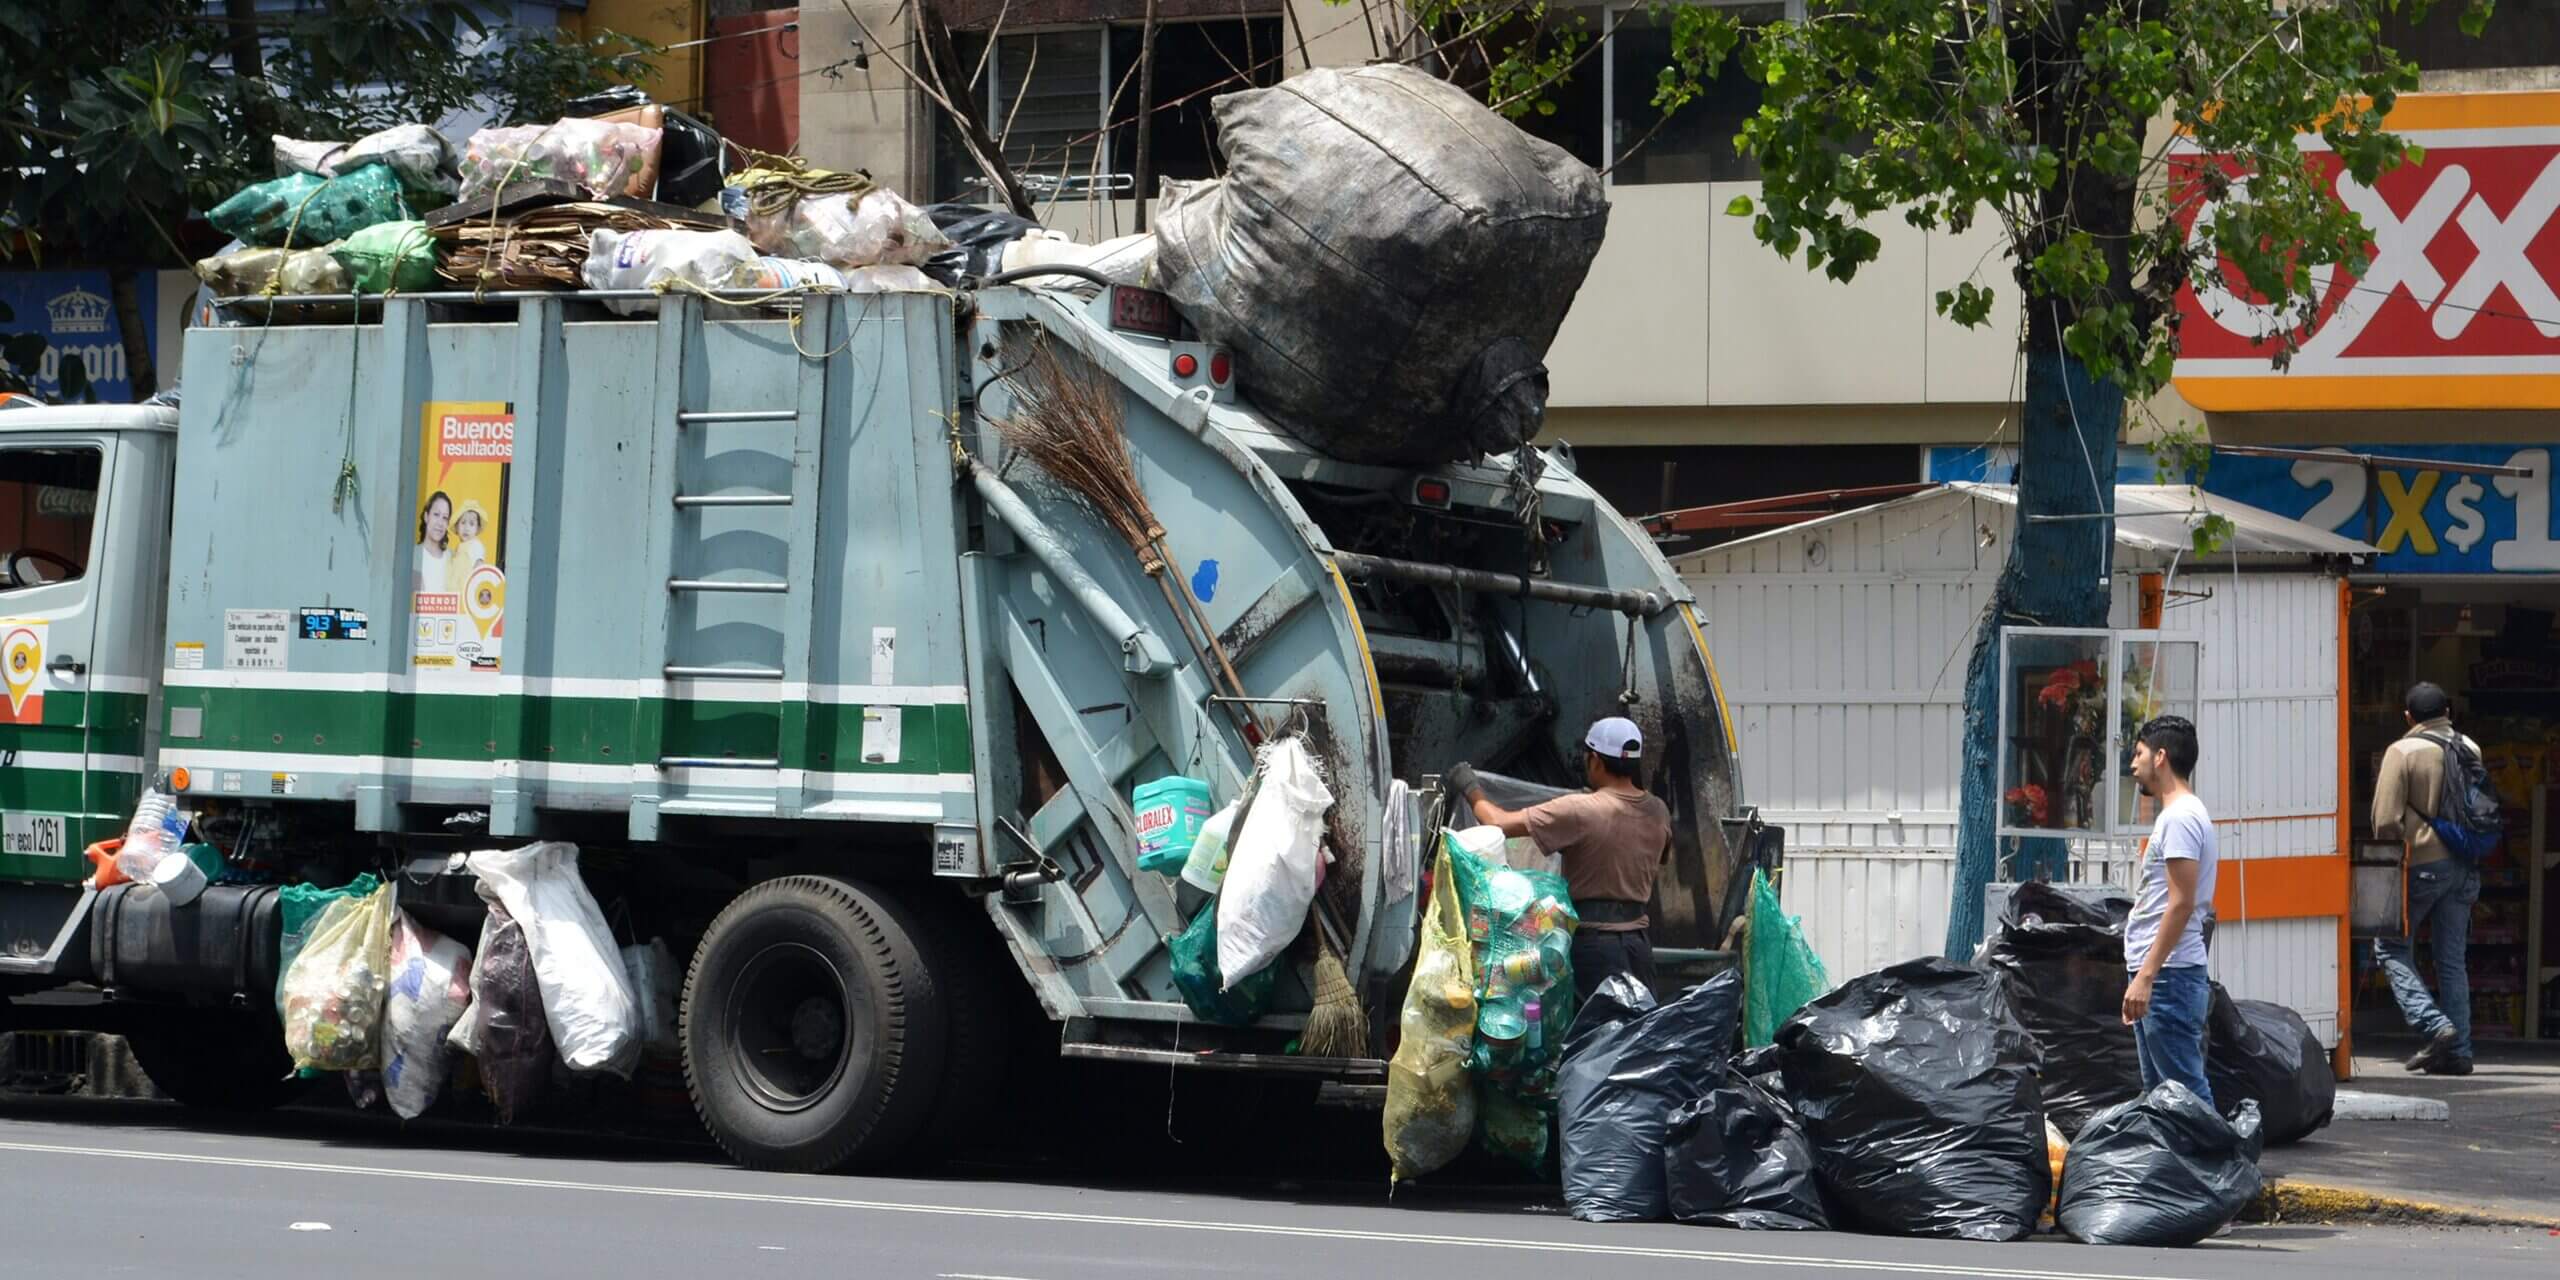 Garbage truck drivers dealing with a lot of trash.